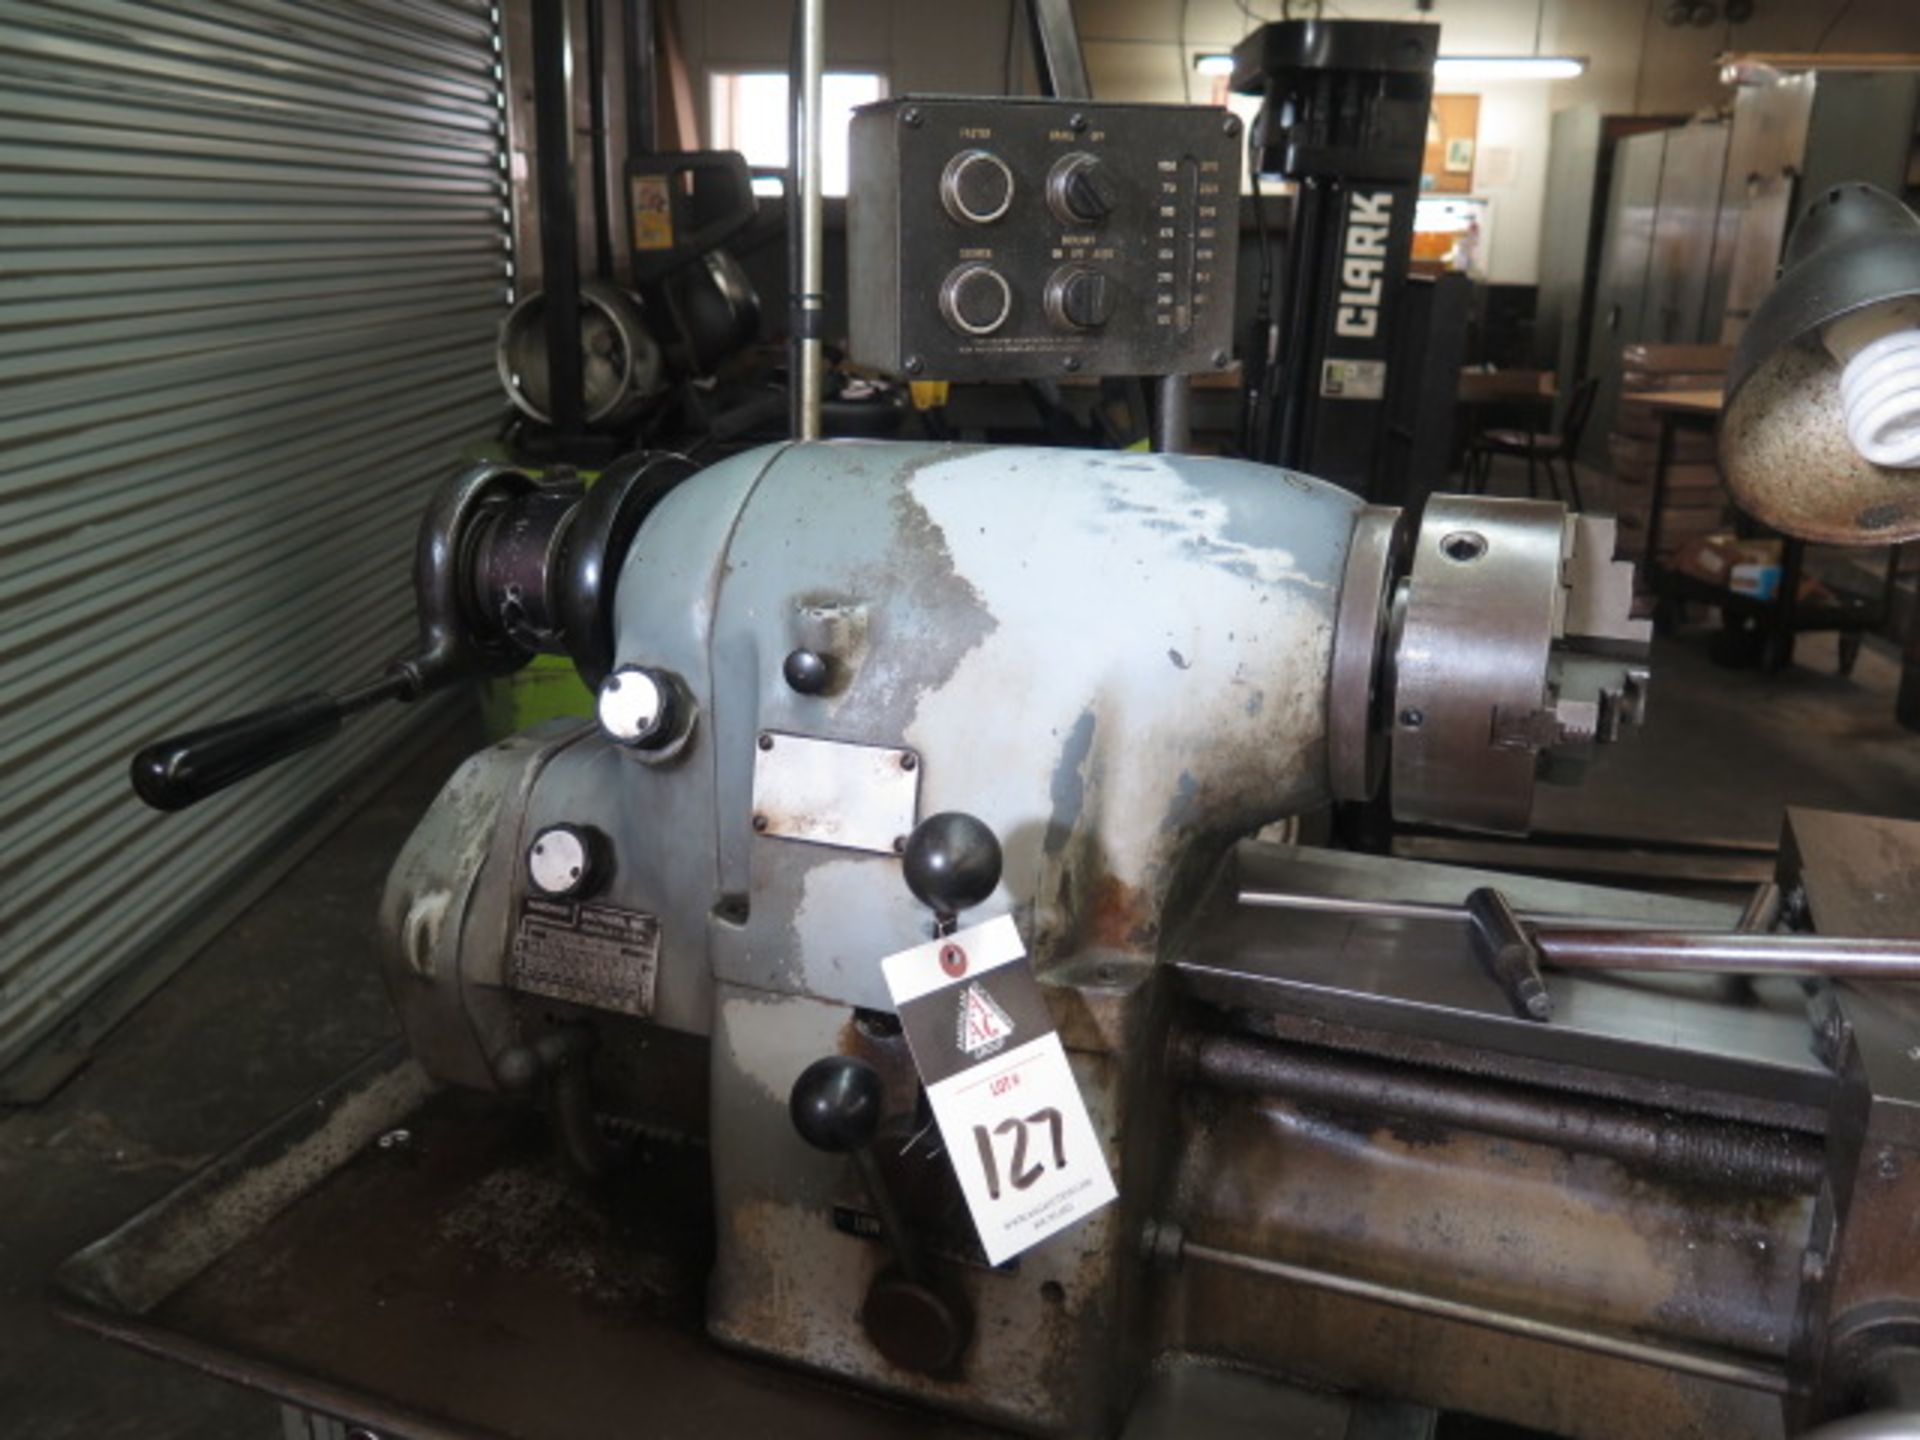 Hardinge HLV-H Tool Room Lathe s/n HLV-H-3244 w/ 125-3000 RPM, Inch Threading, Tailstock, SOLD AS IS - Image 3 of 9